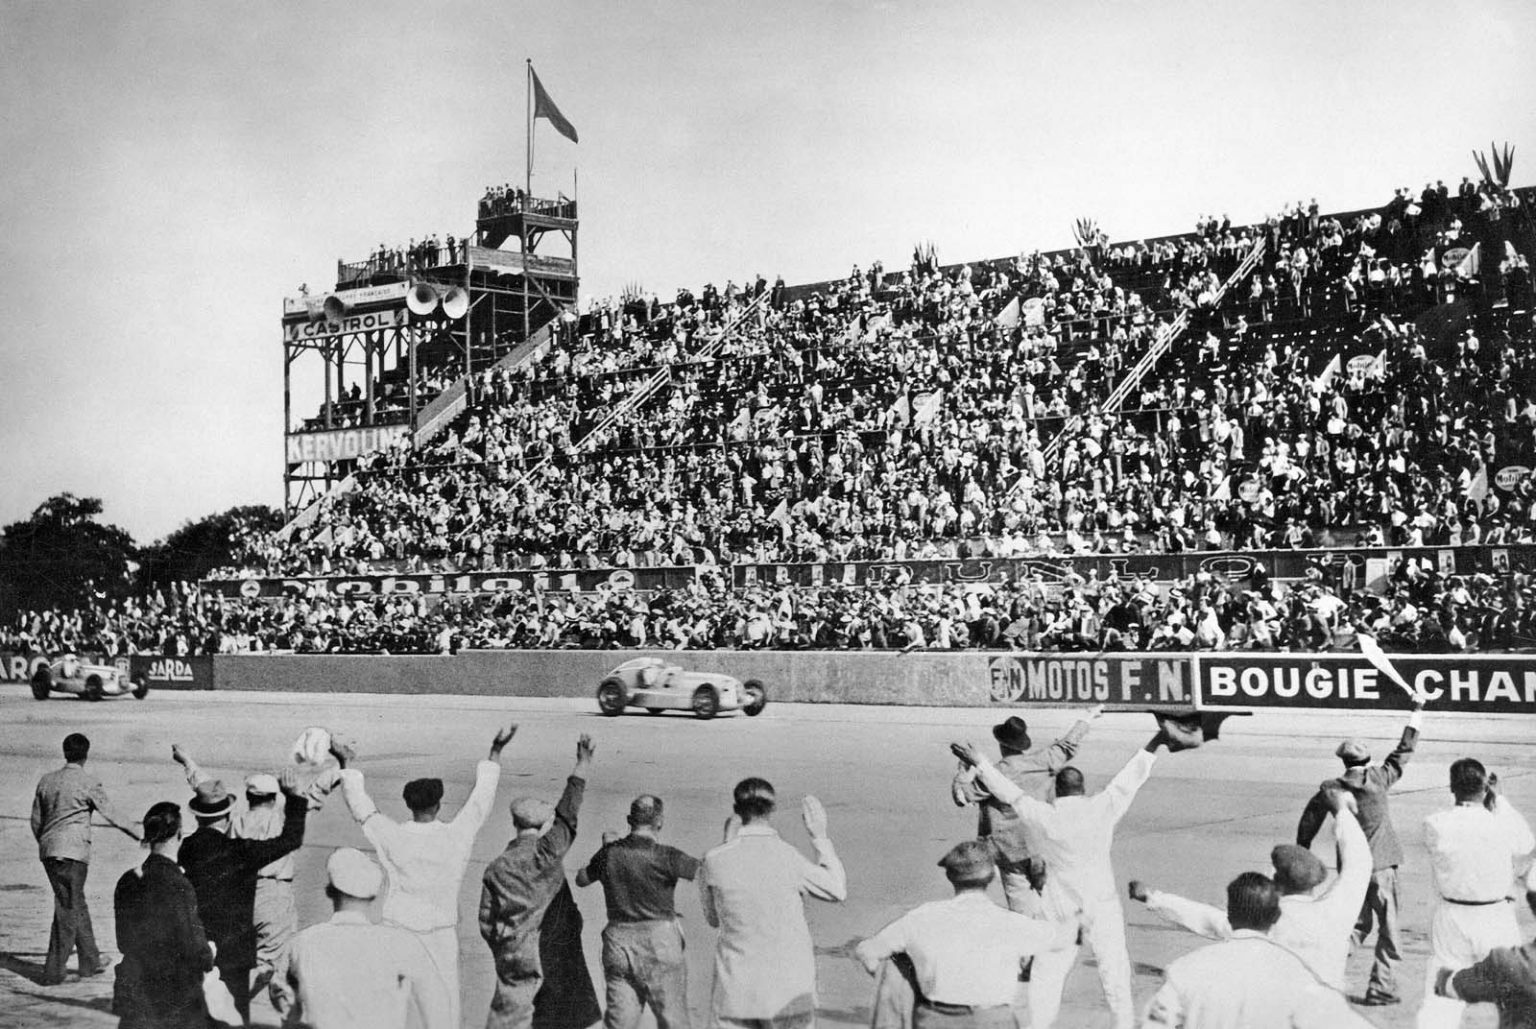 Rudolf Caracciola is crowned the 1935 European Grand Prix Champion at the wheel of the Mercedes-Benz W 25 formula racing car, weighing a mere 750 kilograms. On 23 June 1935, at the French Grand Prix in Montlhéry, Caracciola (starting number 2) crossed the finish line first, directly ahead of his team mate Manfred von Brauchitsch (starting number 6). (Photo signature in the Mercedes-Benz Classic archive: 22163)